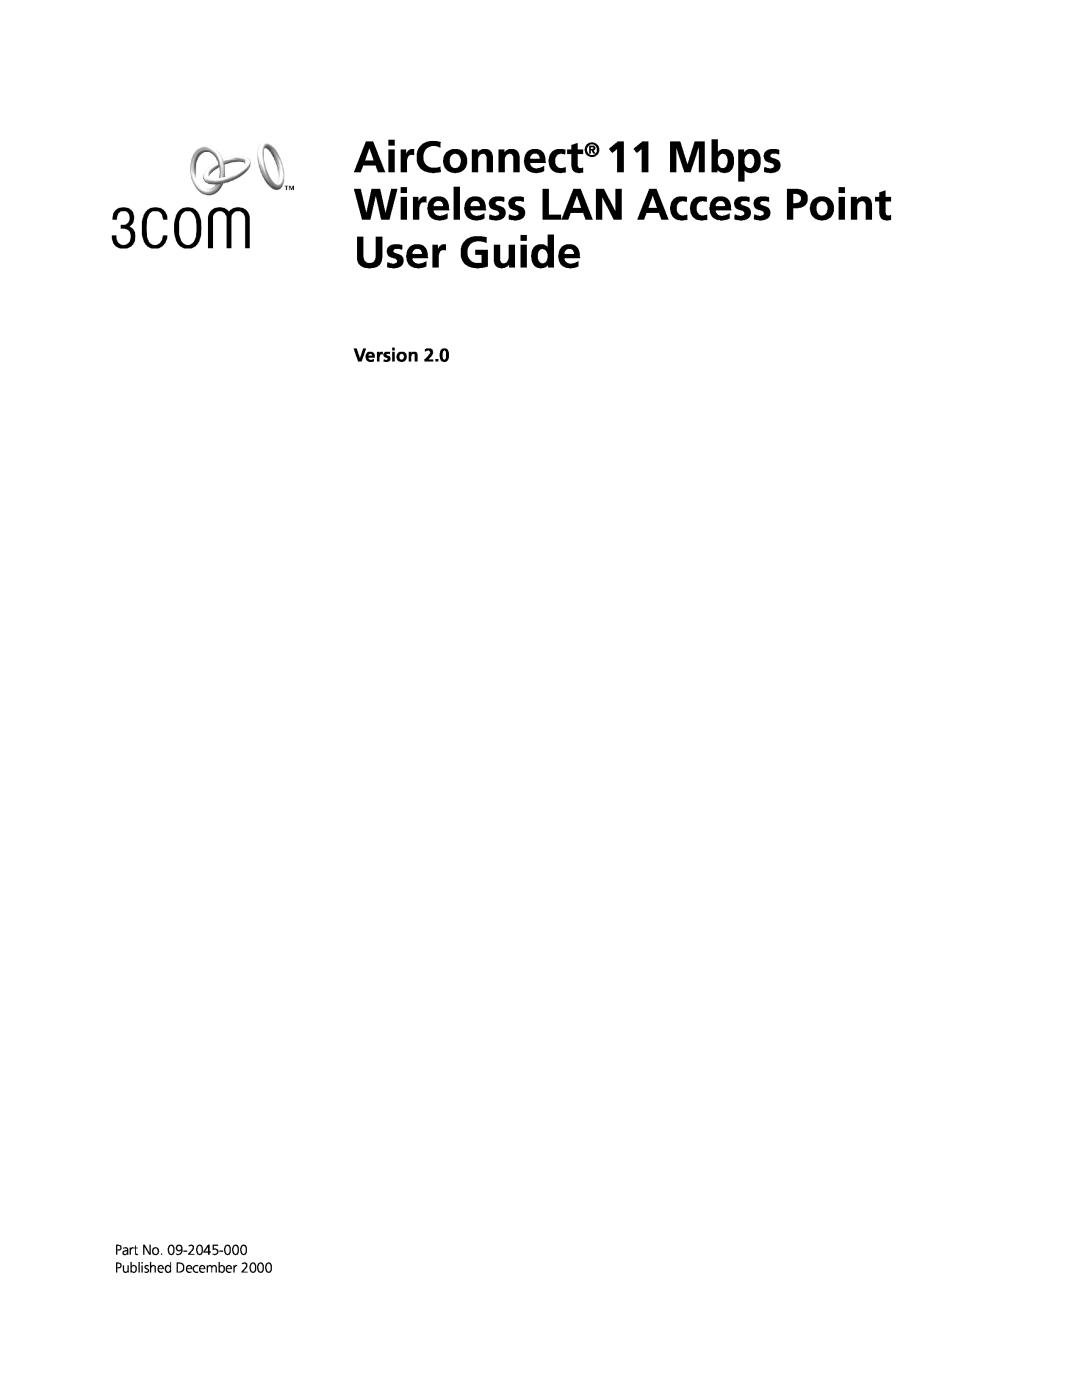 Cabletron Systems 3Com manual Version, AirConnect 11 Mbps Wireless LAN Access Point User Guide, Published December 